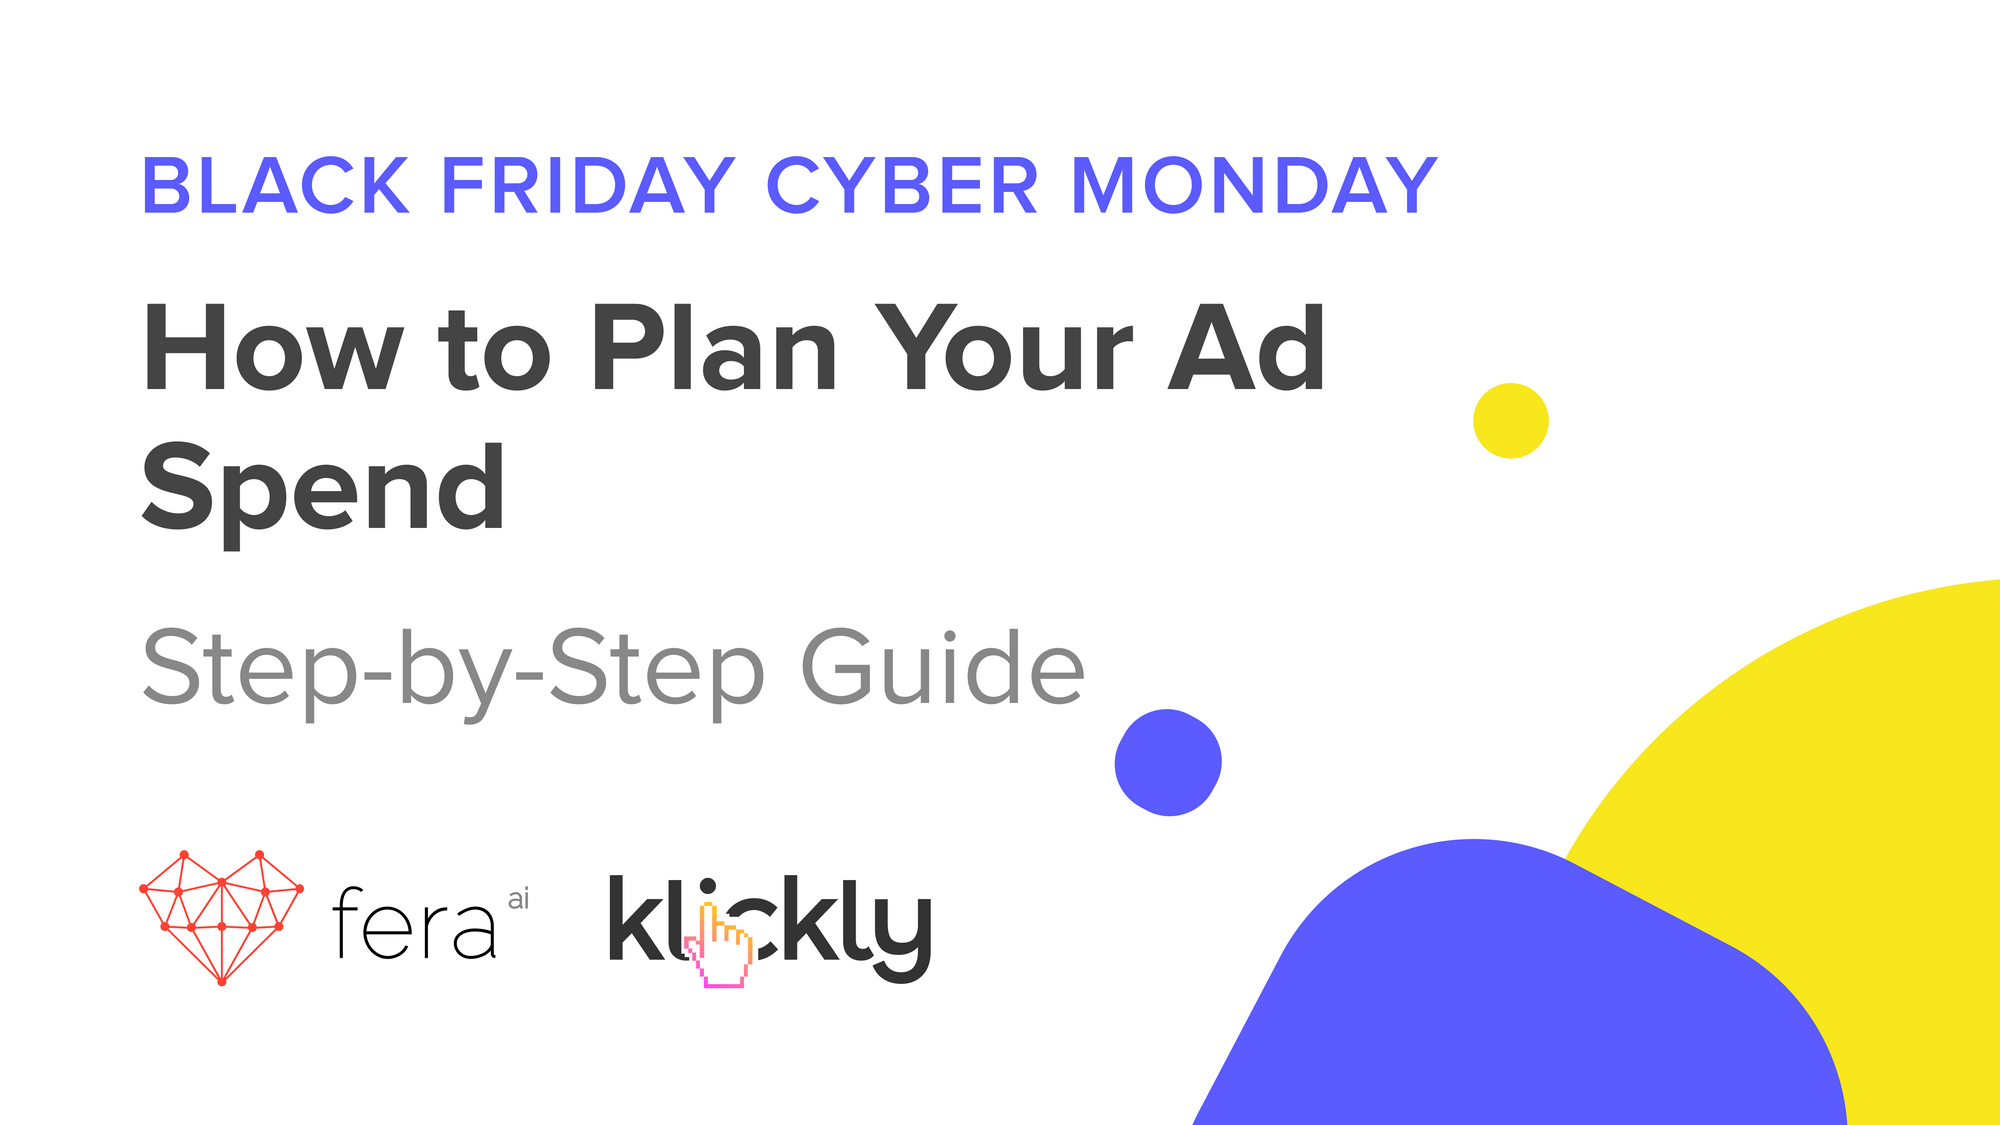 BFCM: PLANNING YOUR AD SPEND FOR Q4